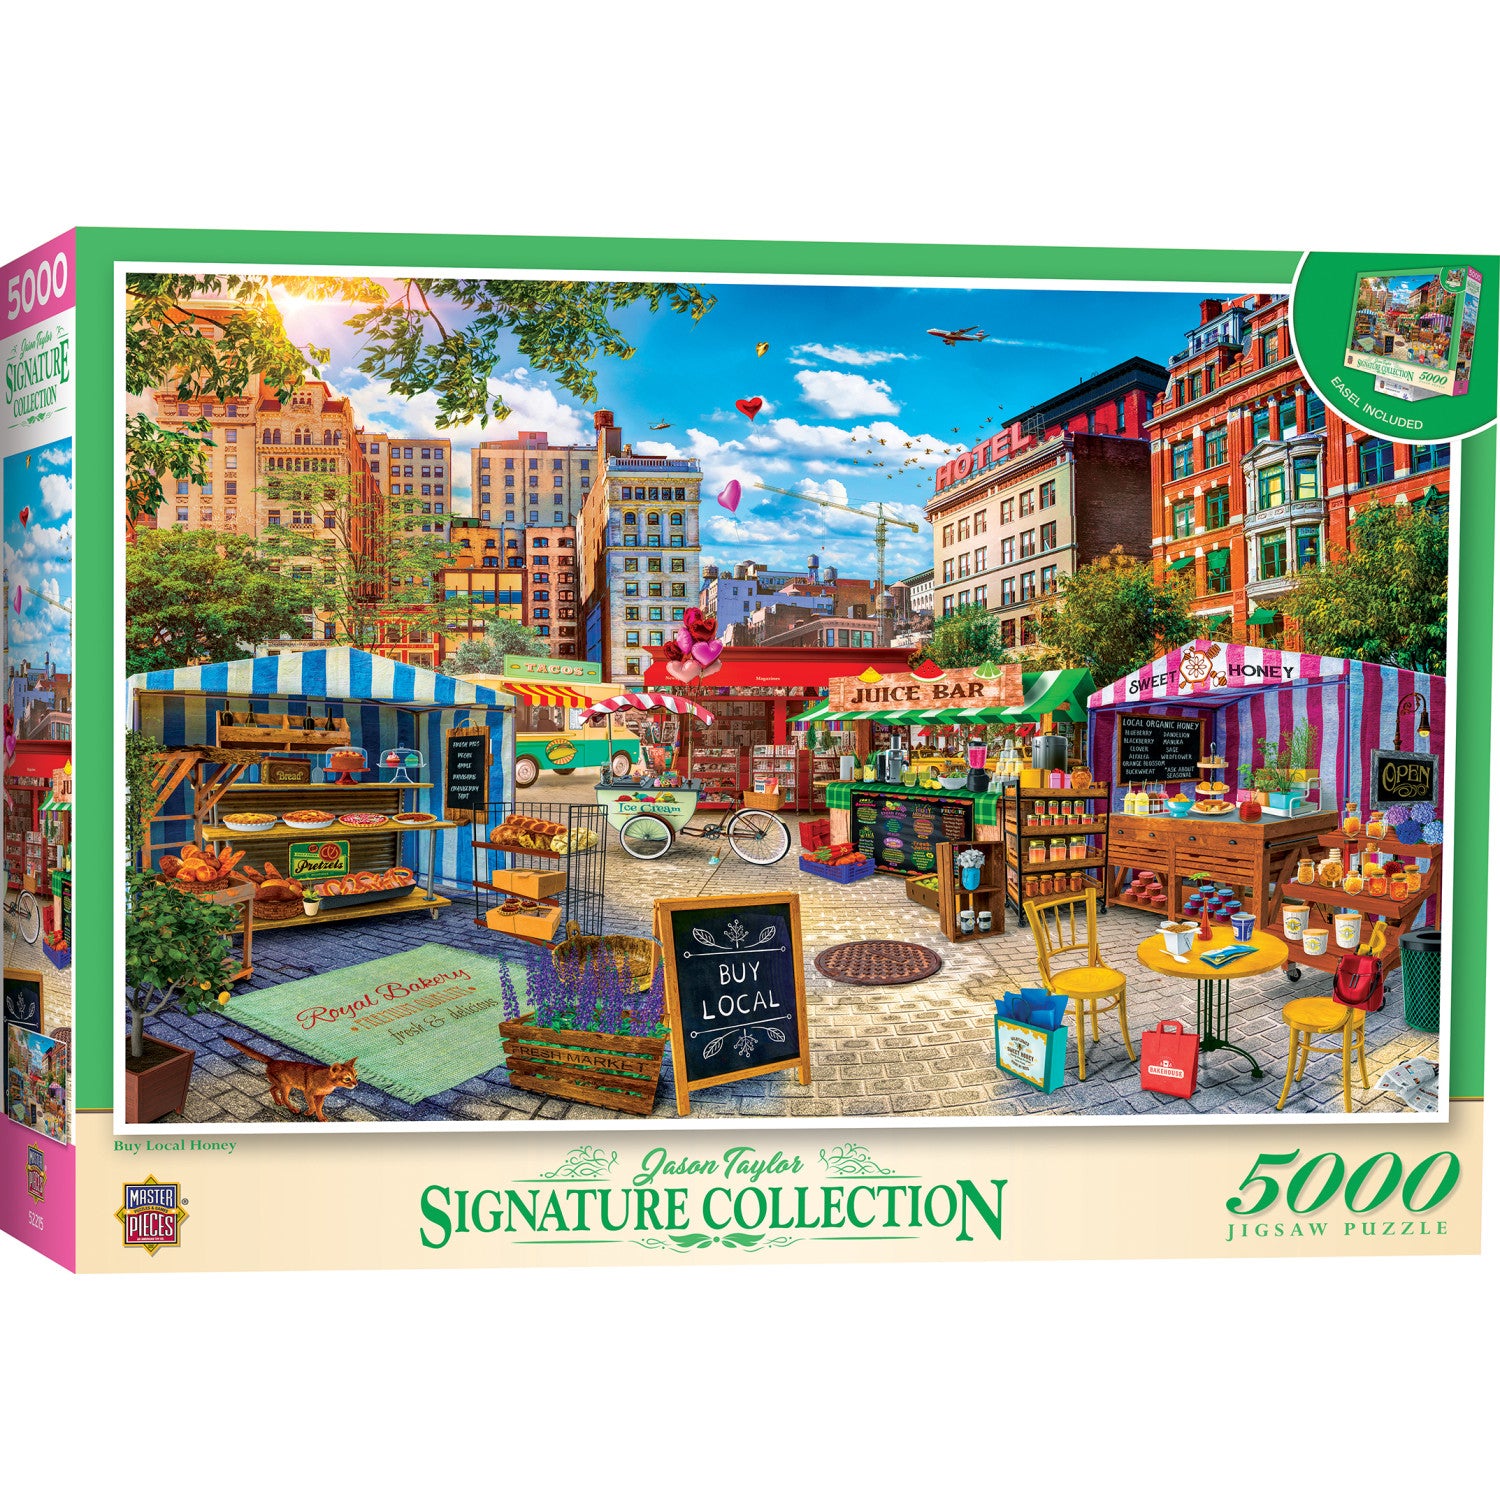 Signature Collection - Buy Local Honey 5000 Piece Jigsaw Puzzle